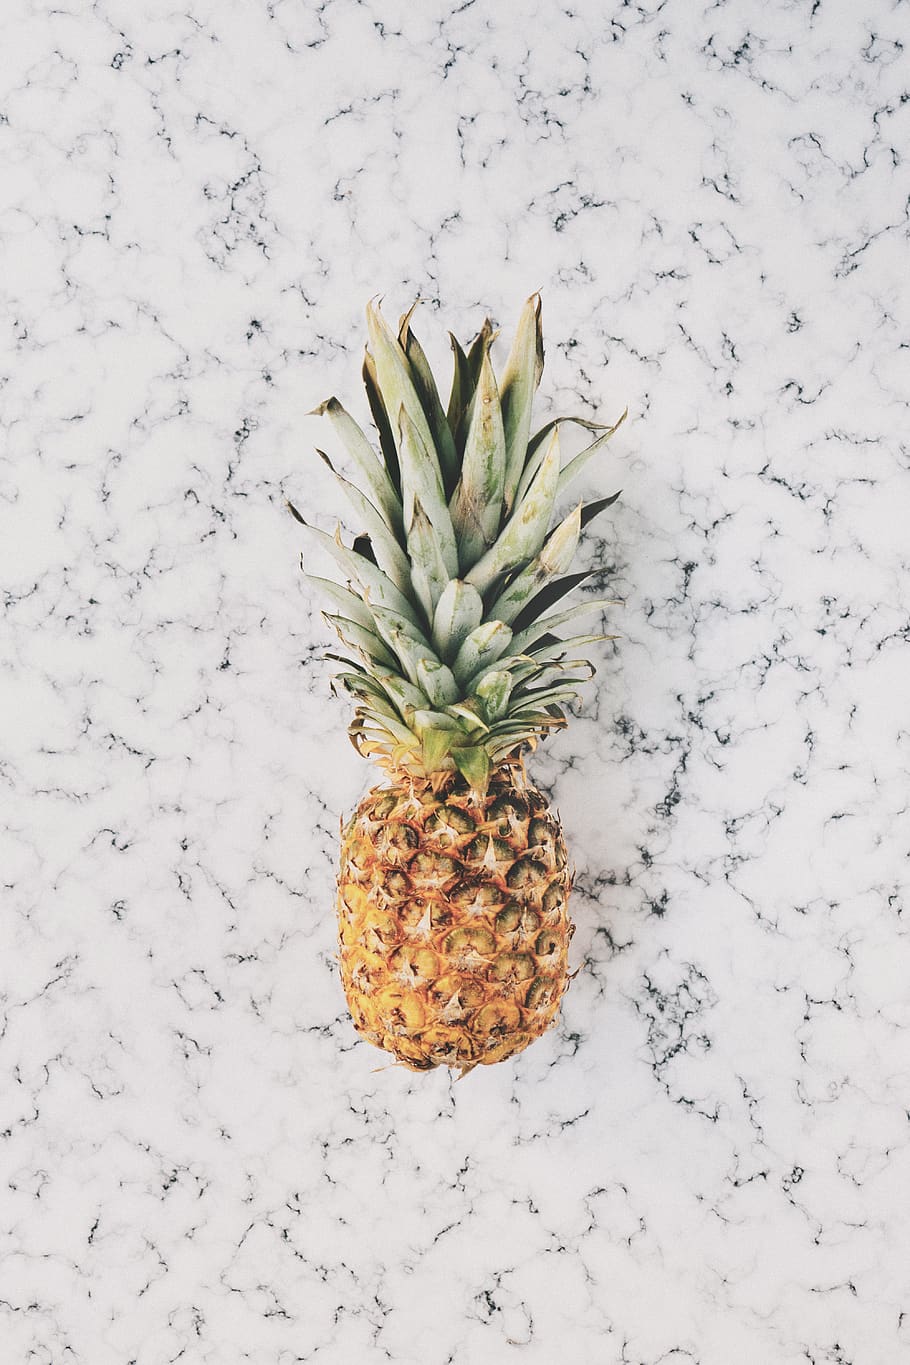 A Pineapple Sitting On A White Countertop - Pineapple With Marble Background - HD Wallpaper 